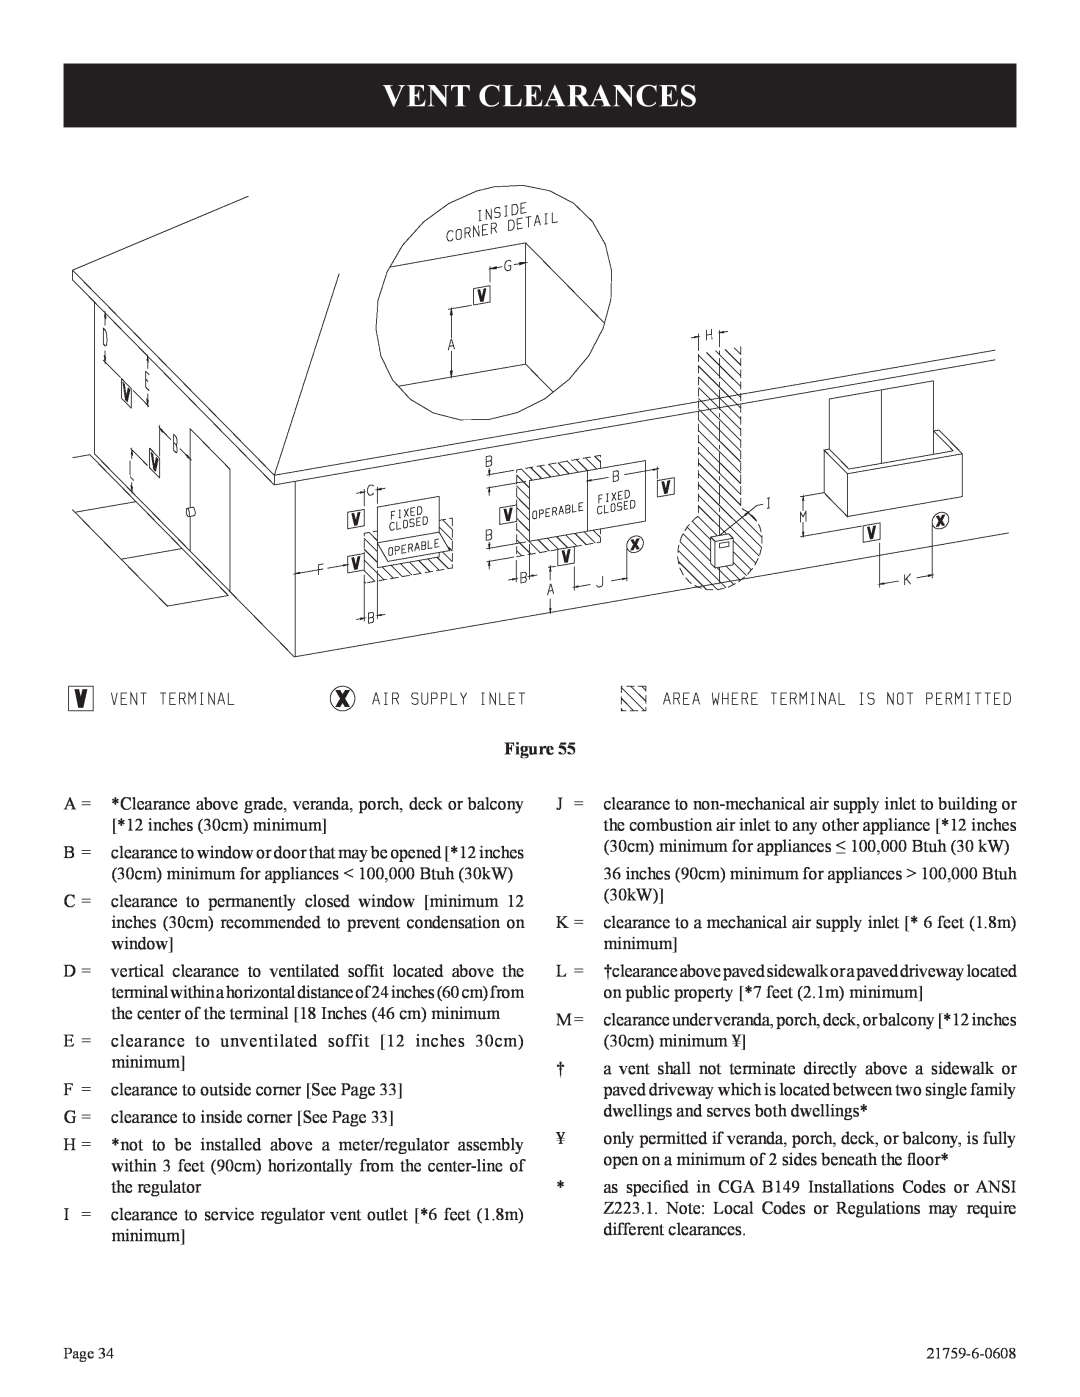 Empire Comfort Systems P)-2, DVP42FP installation instructions Vent Clearances, Figure 